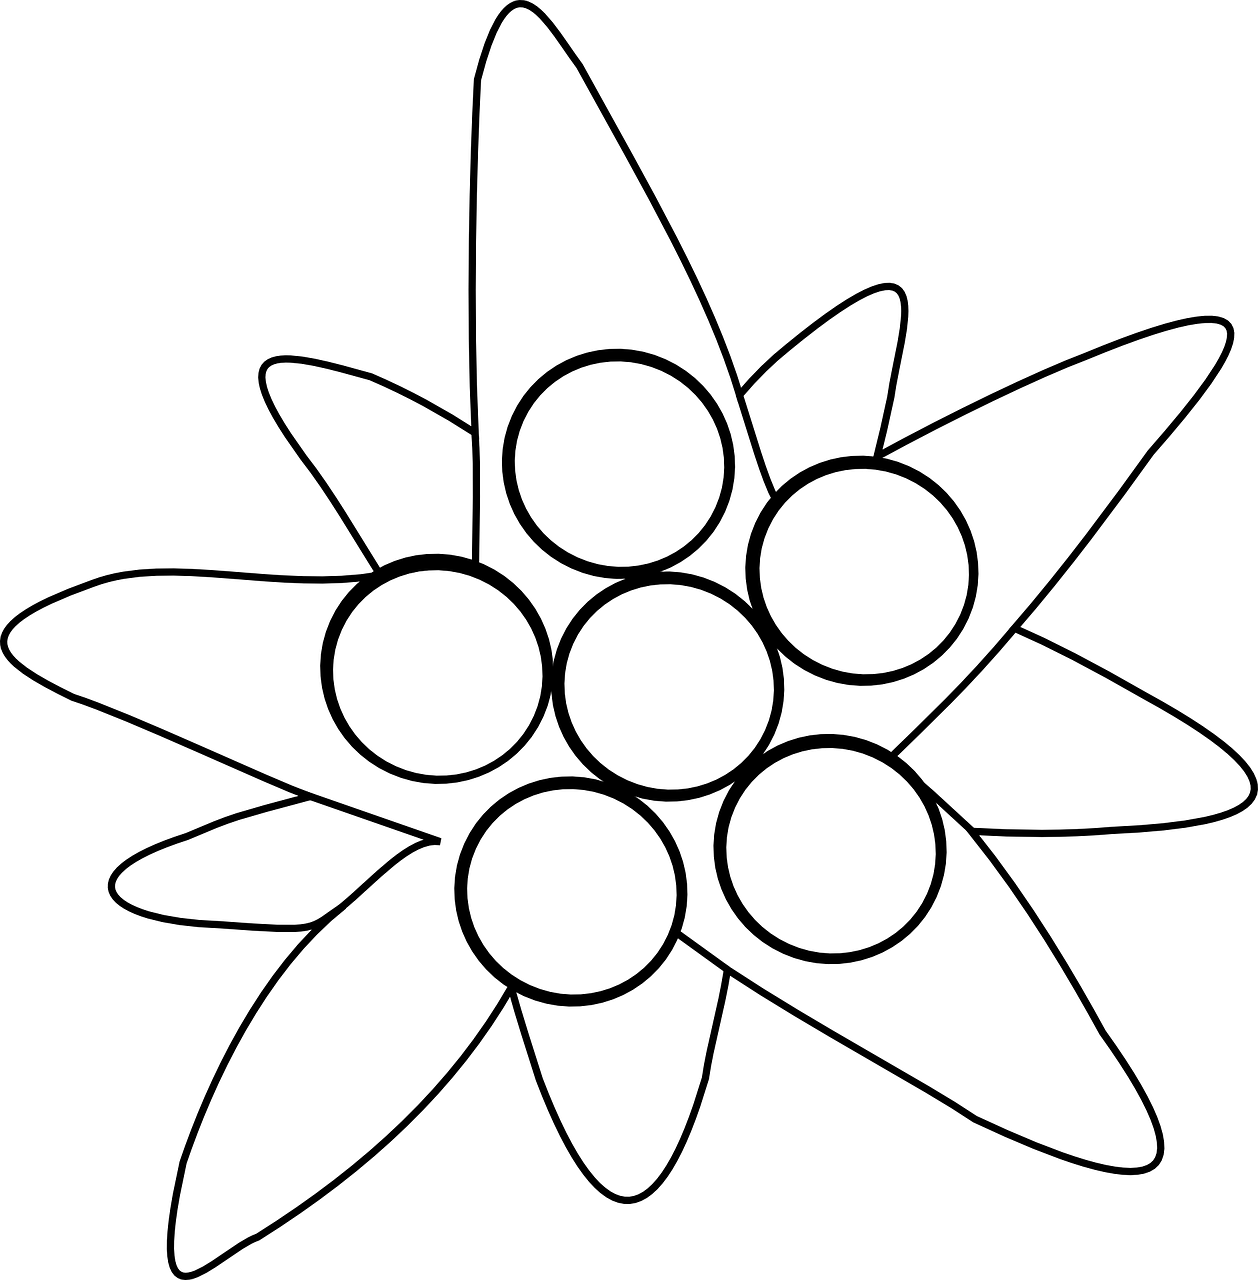 Edelweiss Transparent Image